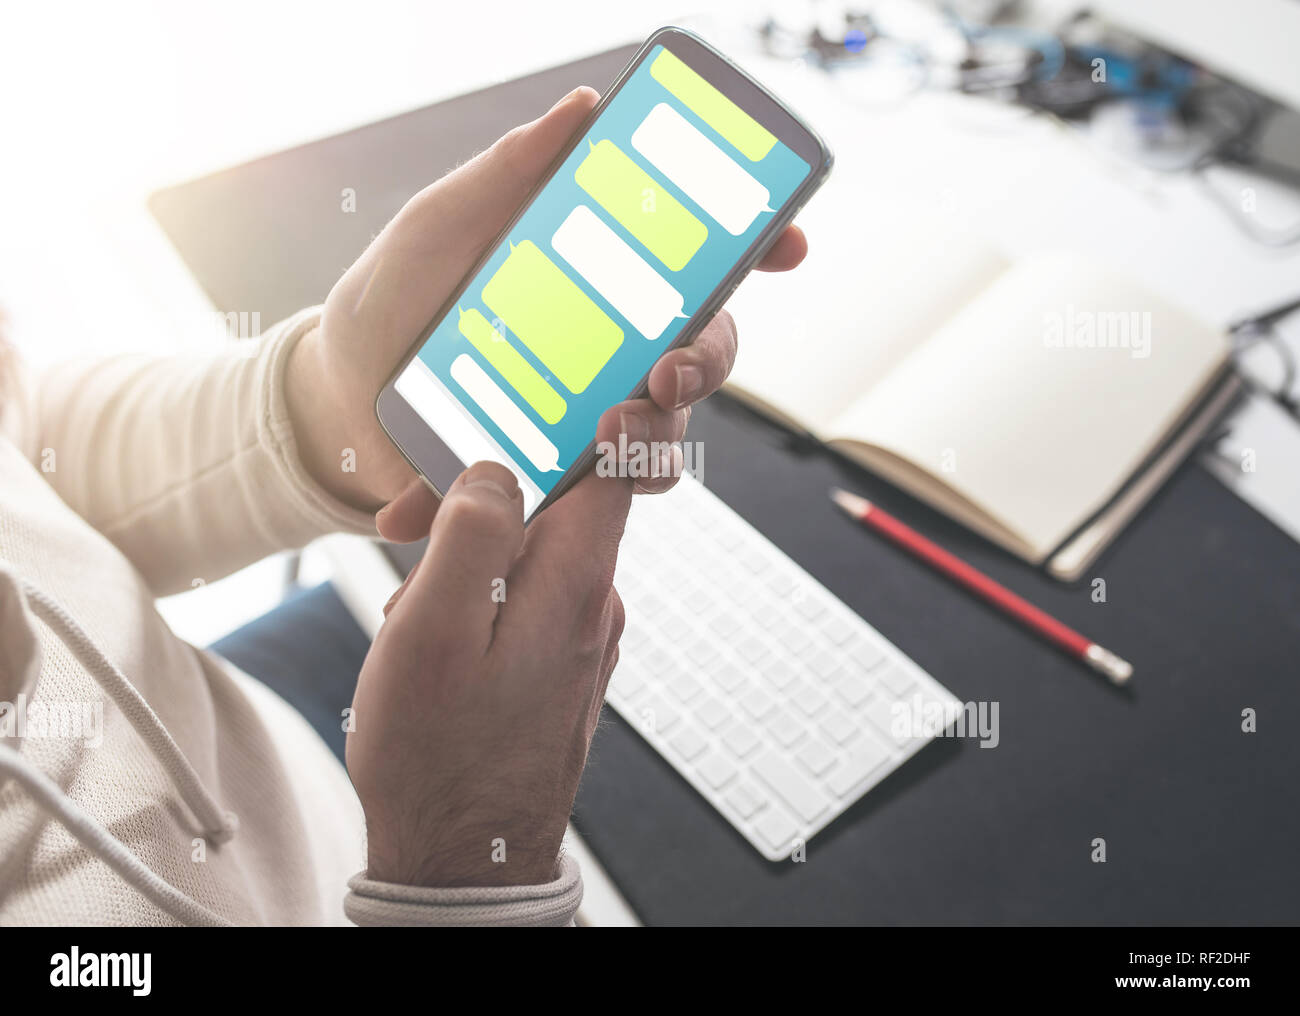 person using messaging app mock-up on smartphone at office desk Stock Photo